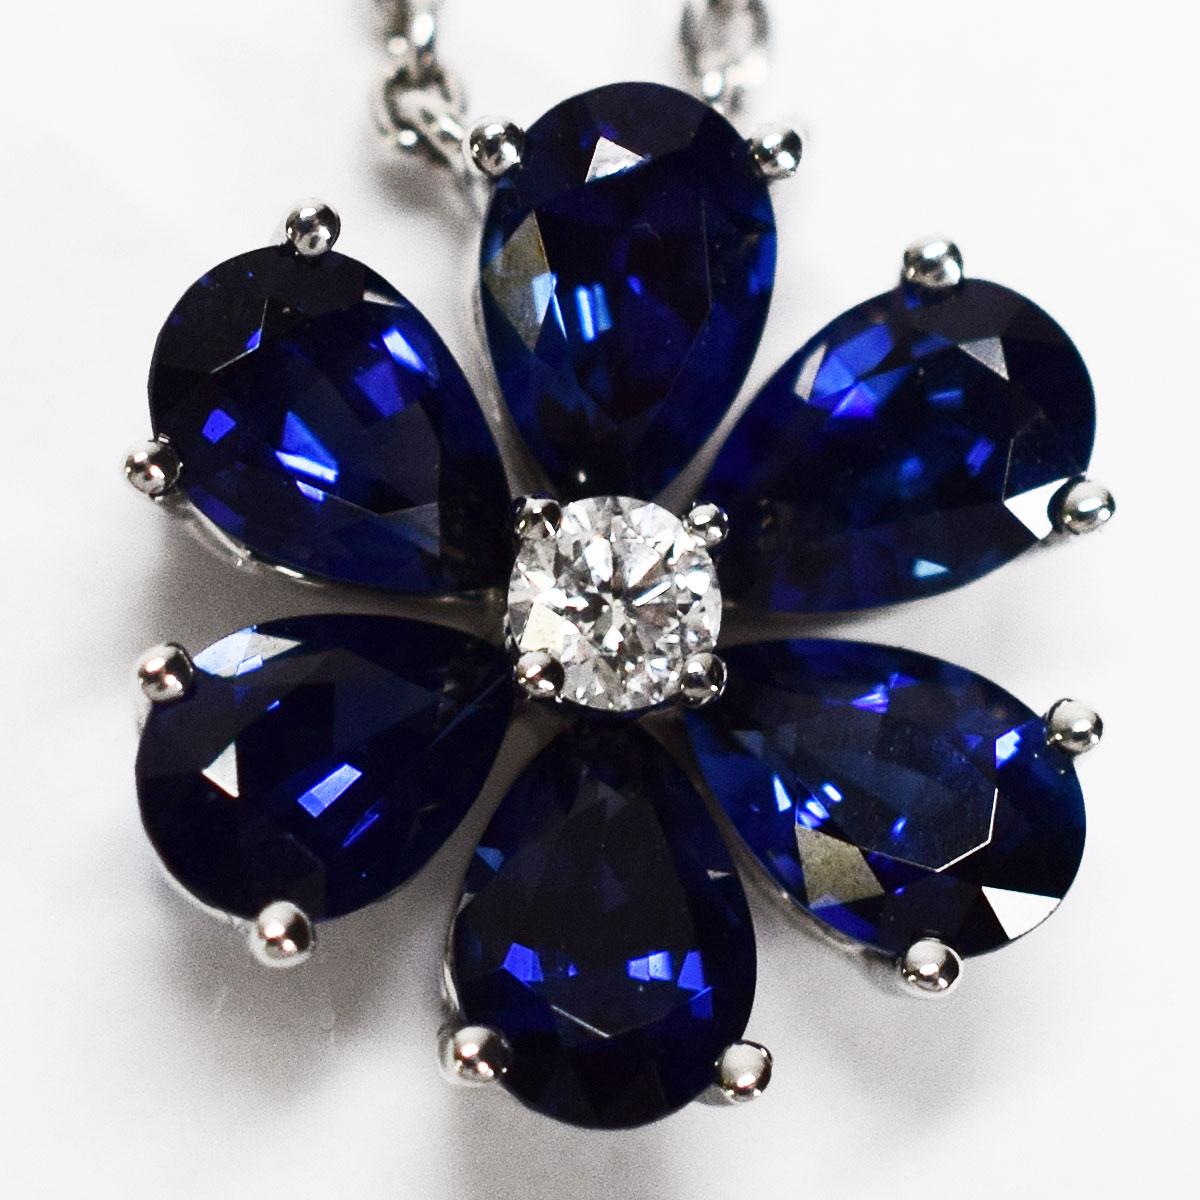 Brand:HARRY WINSTON
Retail Price:JPY913,000YEN（included tax)
Name:Forget Me Not By Harry Winston Pendant
Material:Pear Shape Sapphire (S1.62ct), Diamond (D0.04ct), PT950 Platinum
Weigh:4.3g（Approx)
neck around:40.5cm / 15.94in（Approx)
Top